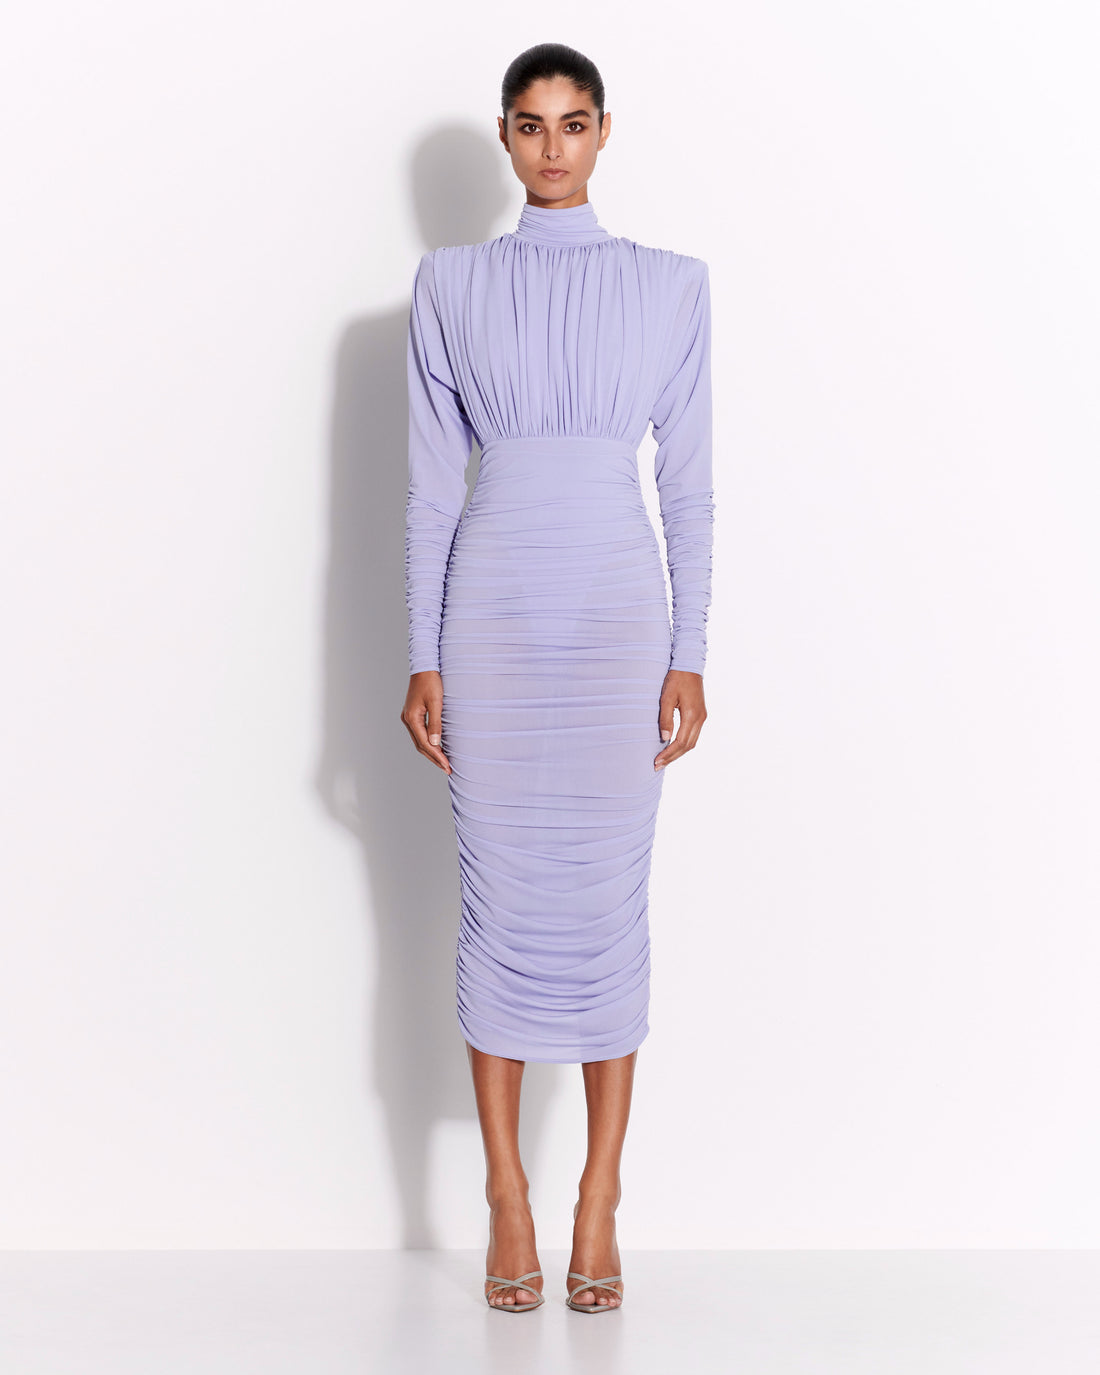 Ruched Turtleneck Dress in Crepe Jersey